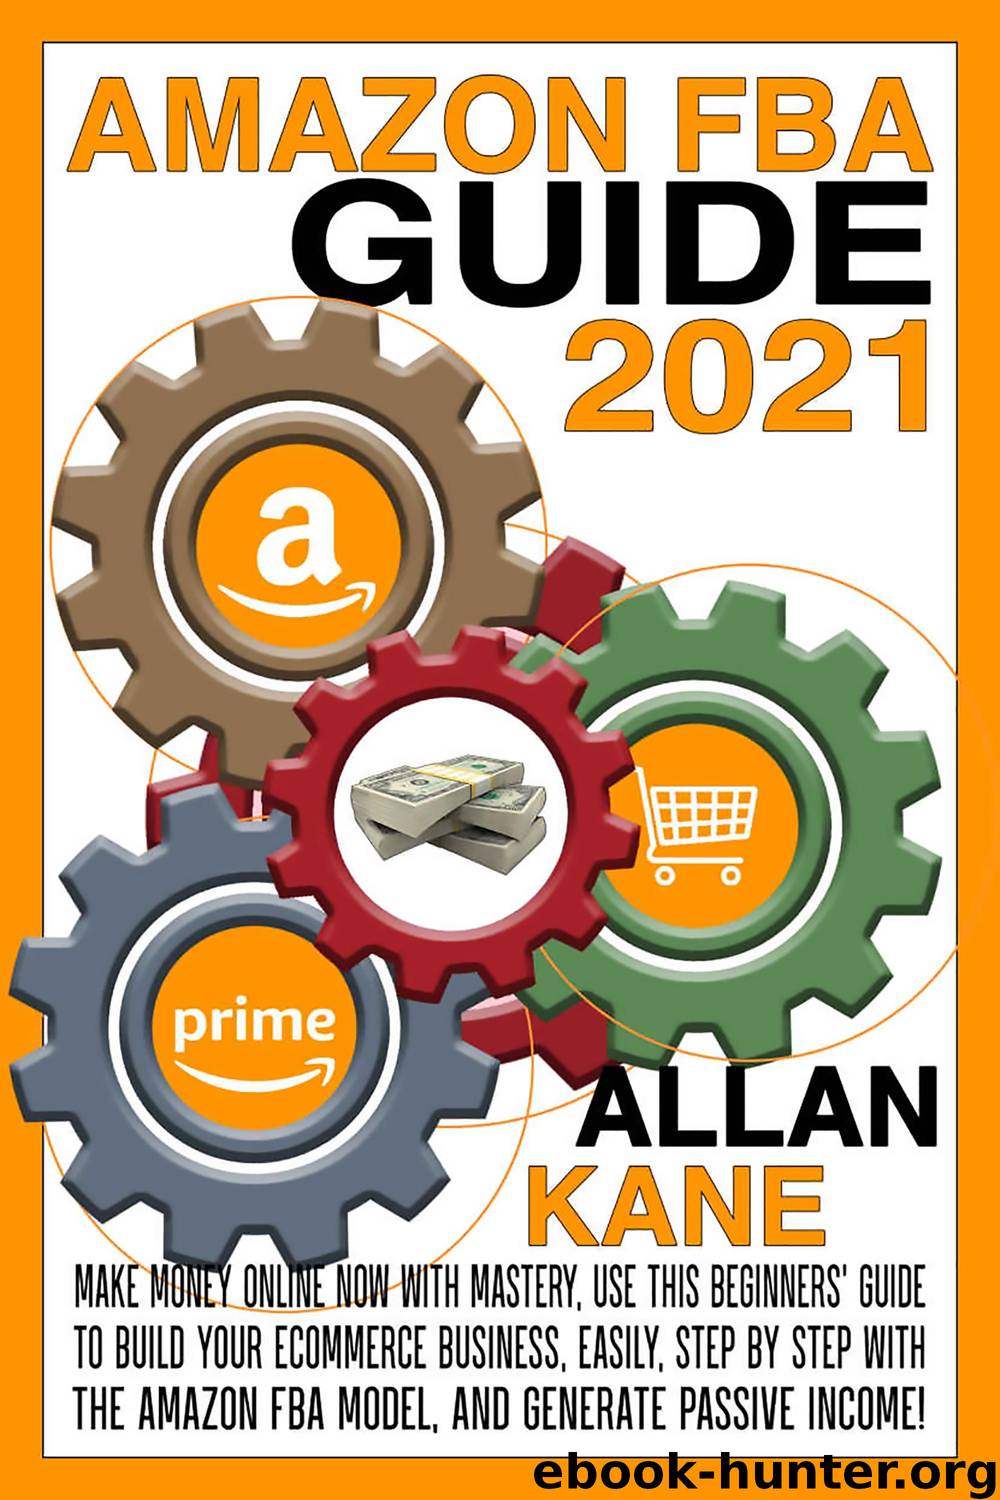 AMAZON FBA GUIDE 2021: Make money online now with mastery, use this beginners' guide to build your eCommerce business, easily, step by step with the amazon FBA model, and generate passive income! by ALLAN KANE